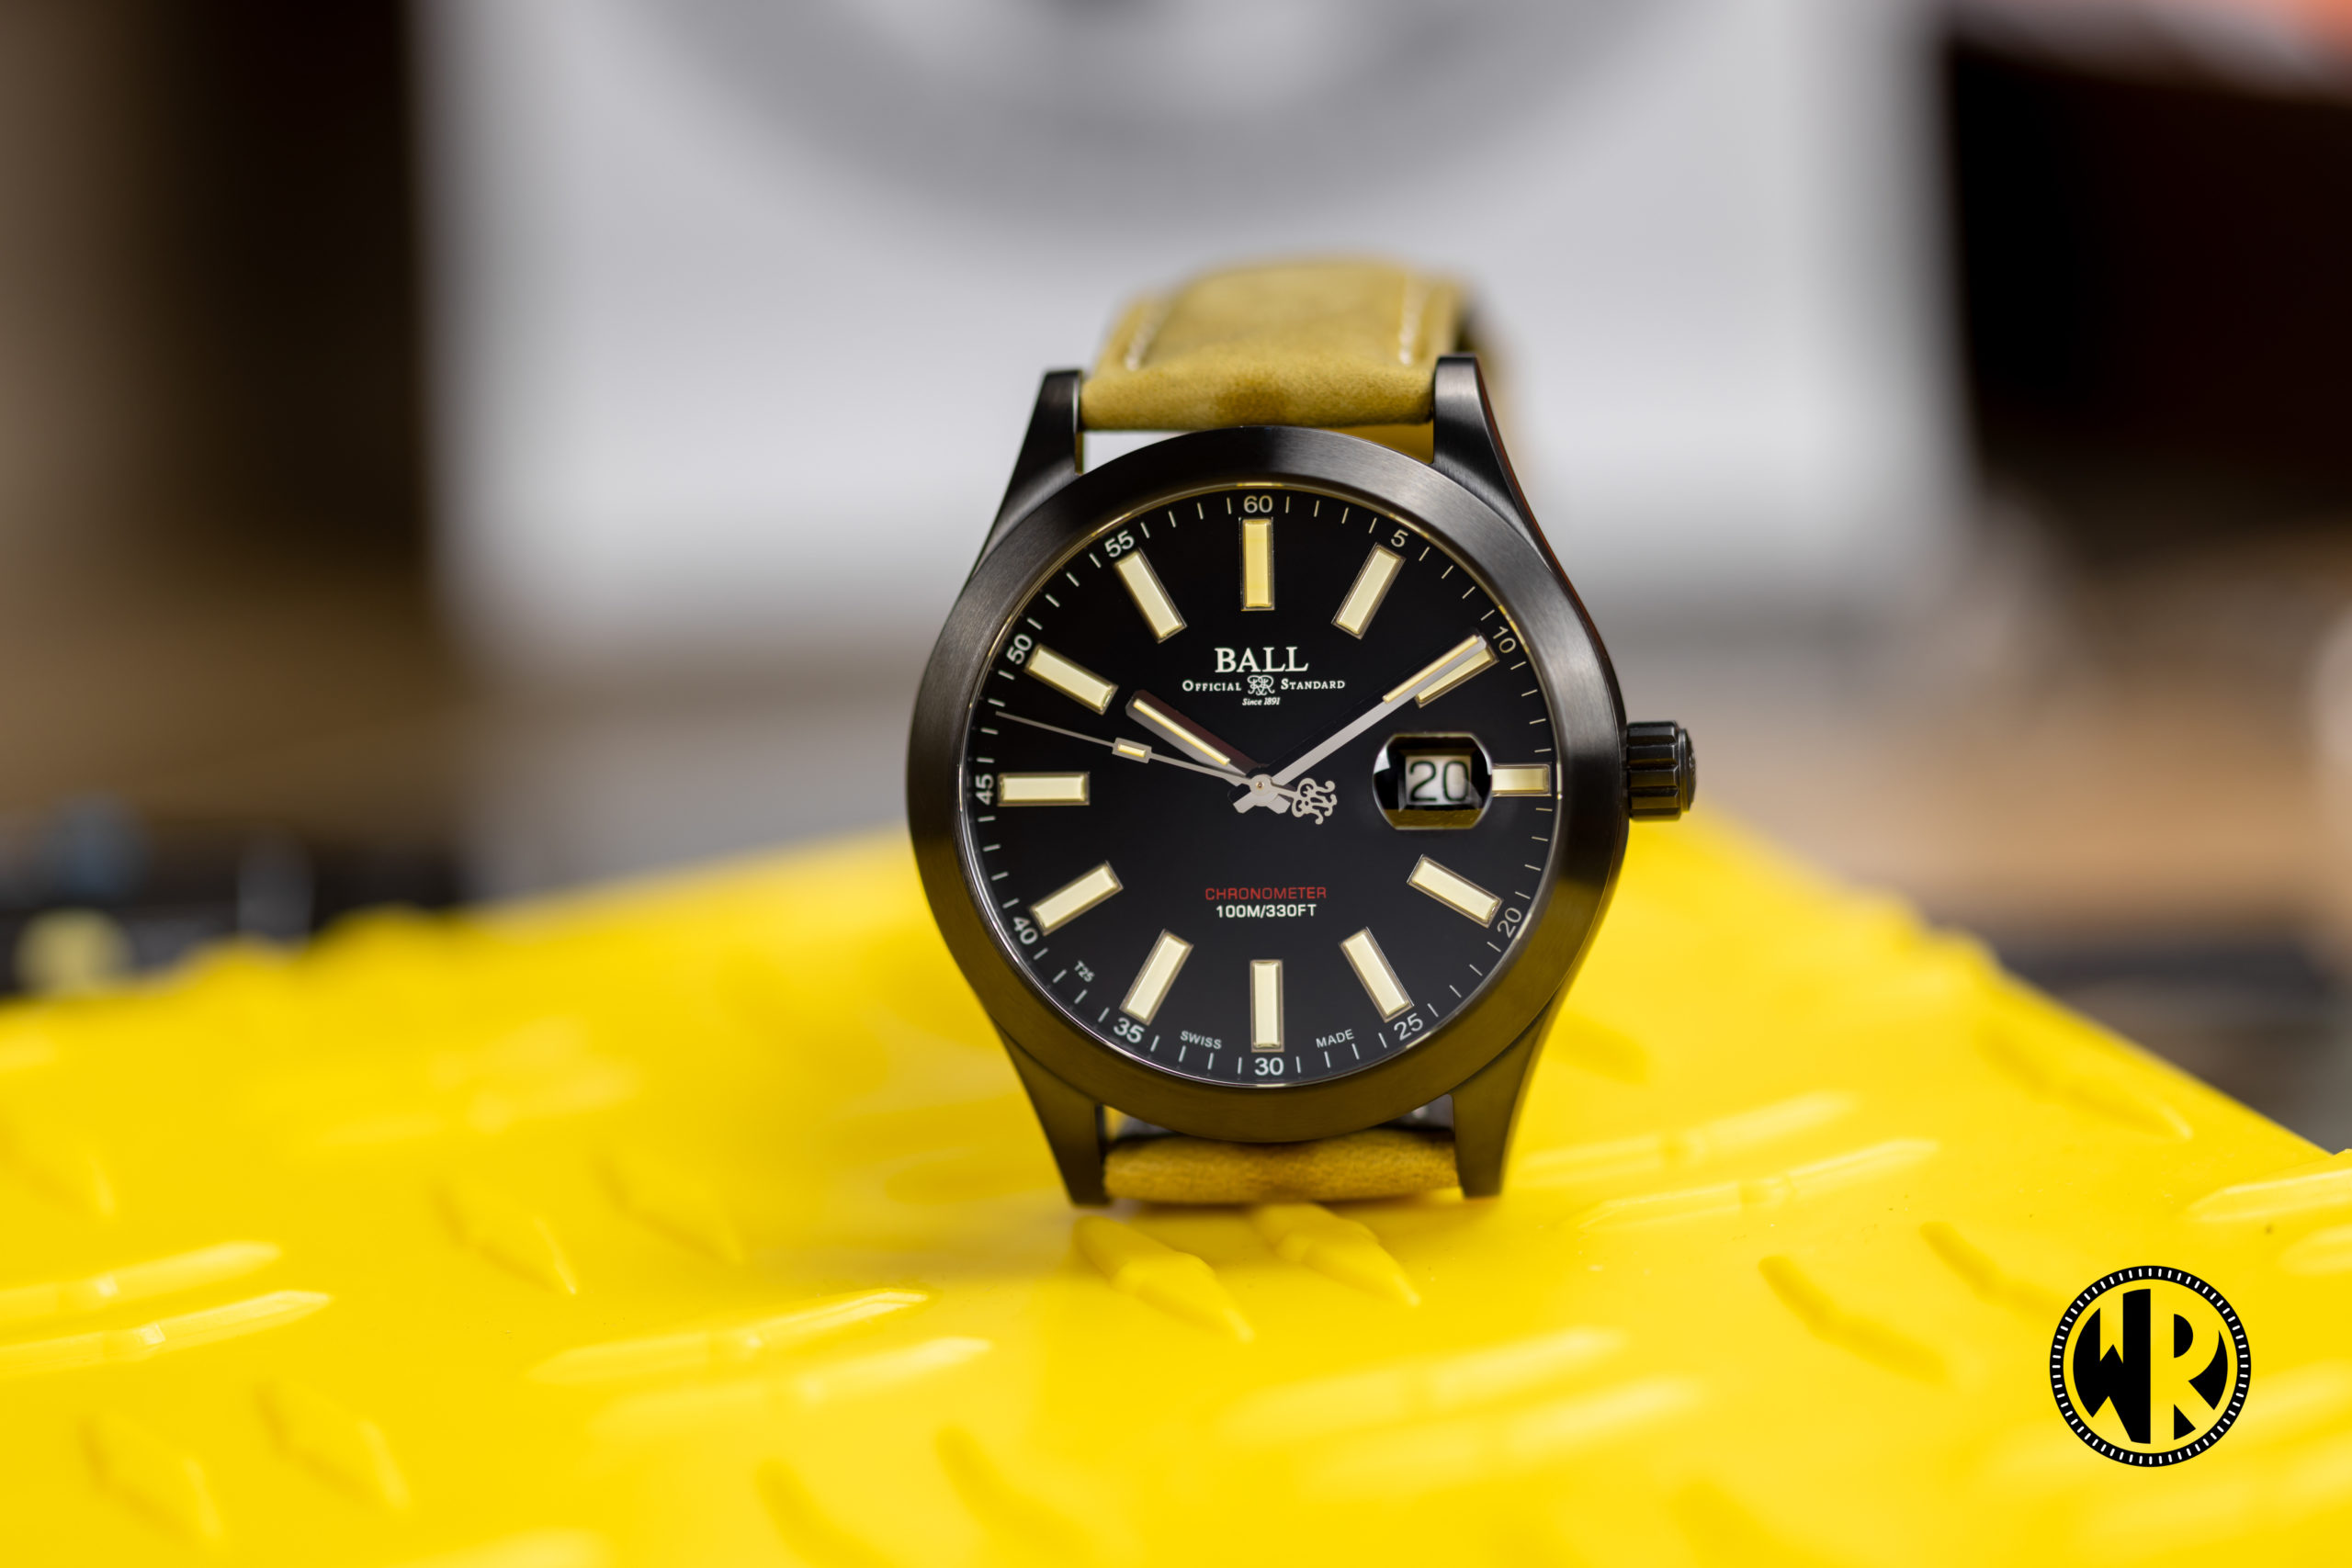 Ball Engineer II Green Berets Hands-On Review